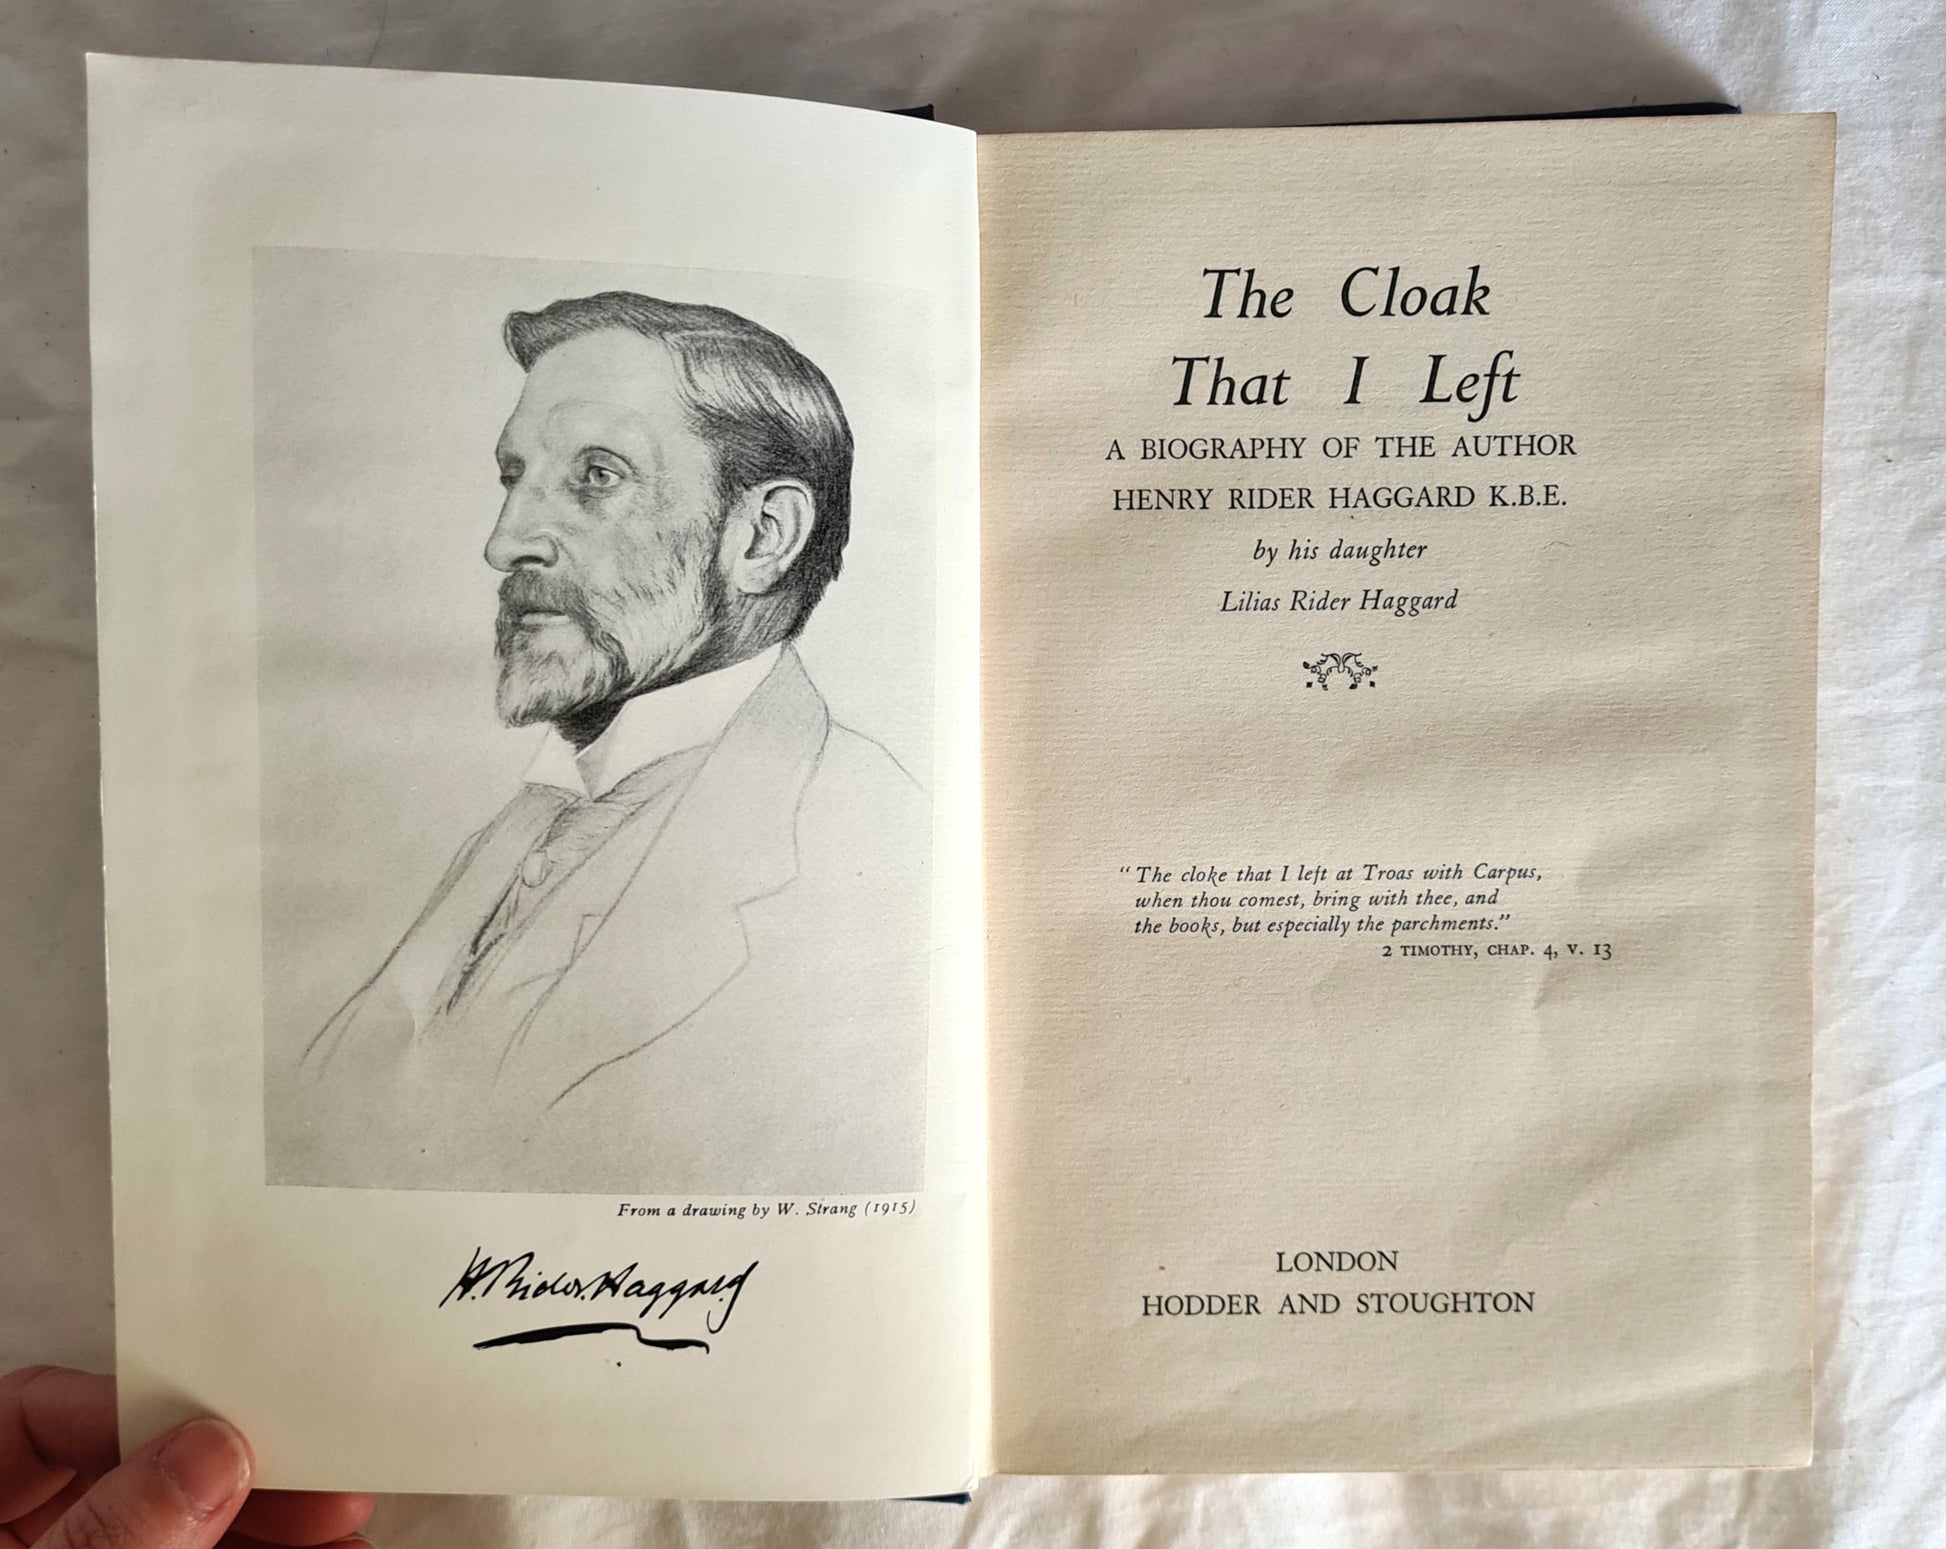 The Cloak That I Left  A Biography of the Author Henry Rider Haggard K.B.E. by his daughter  by Lilias Rider Haggard